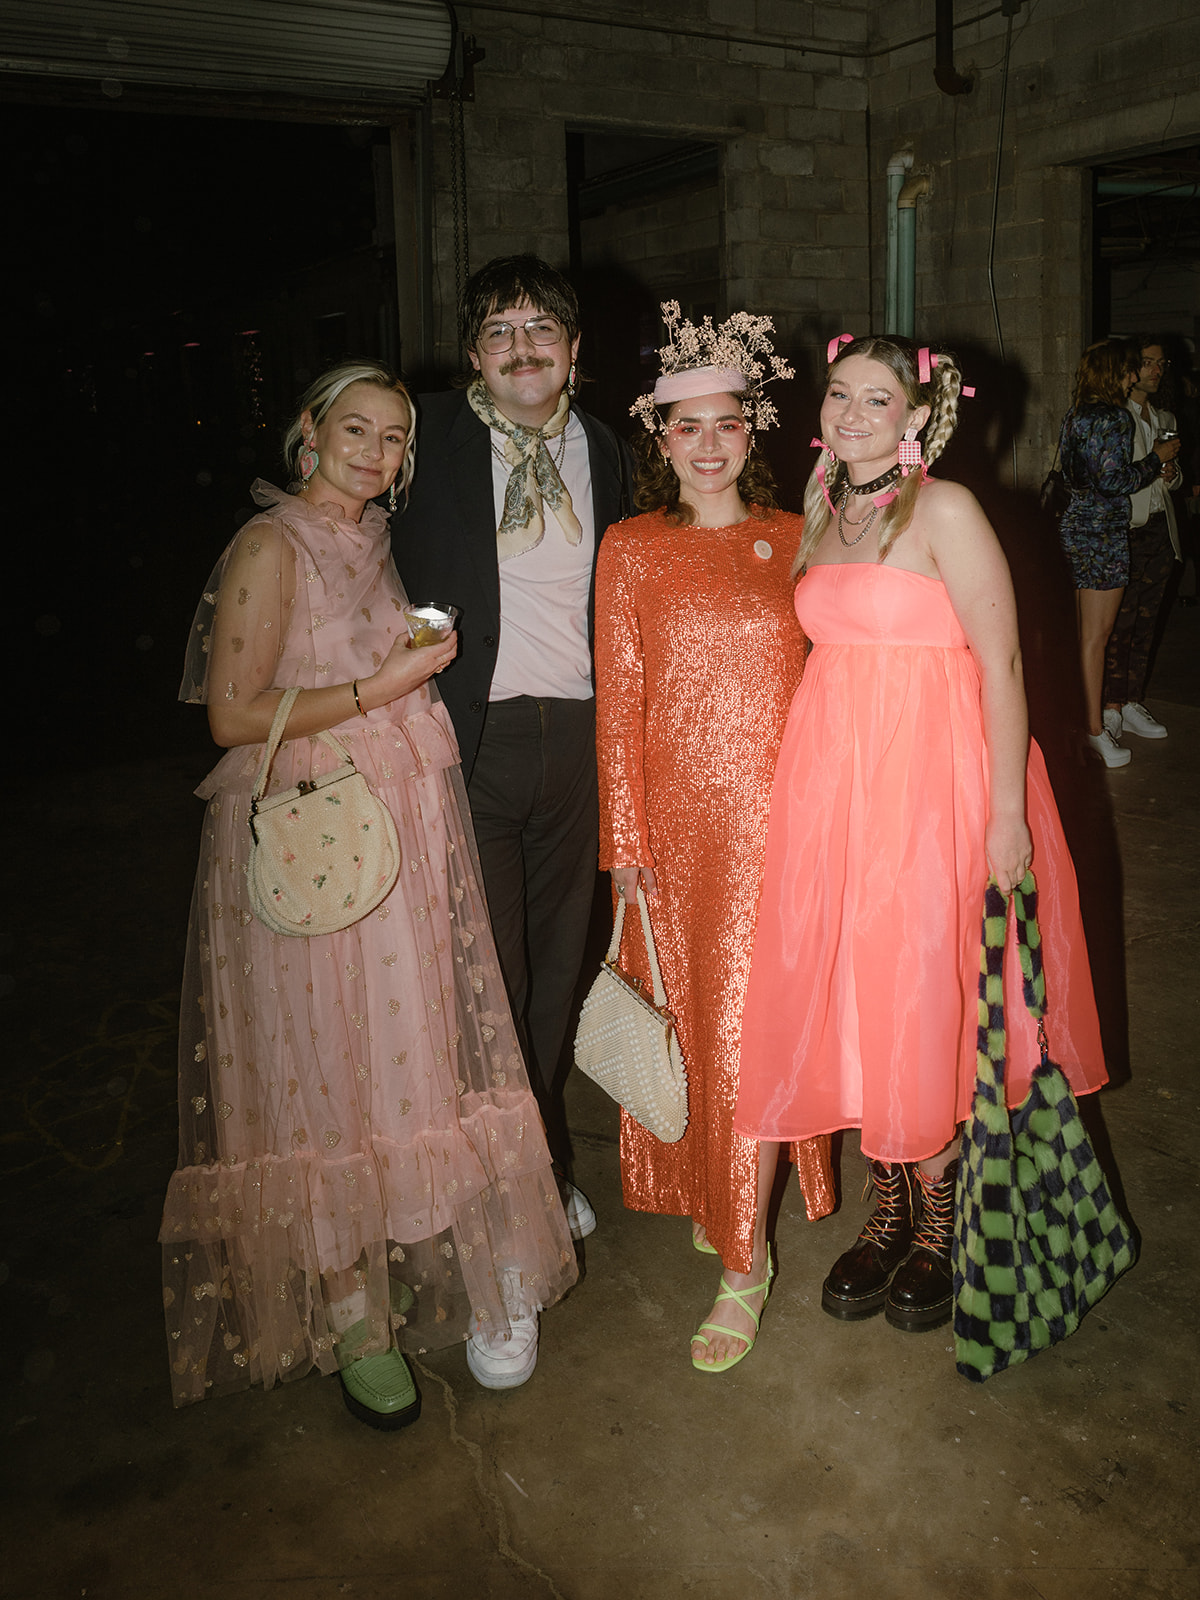 Guests were encouraged to dress on theme as surreal secret garden